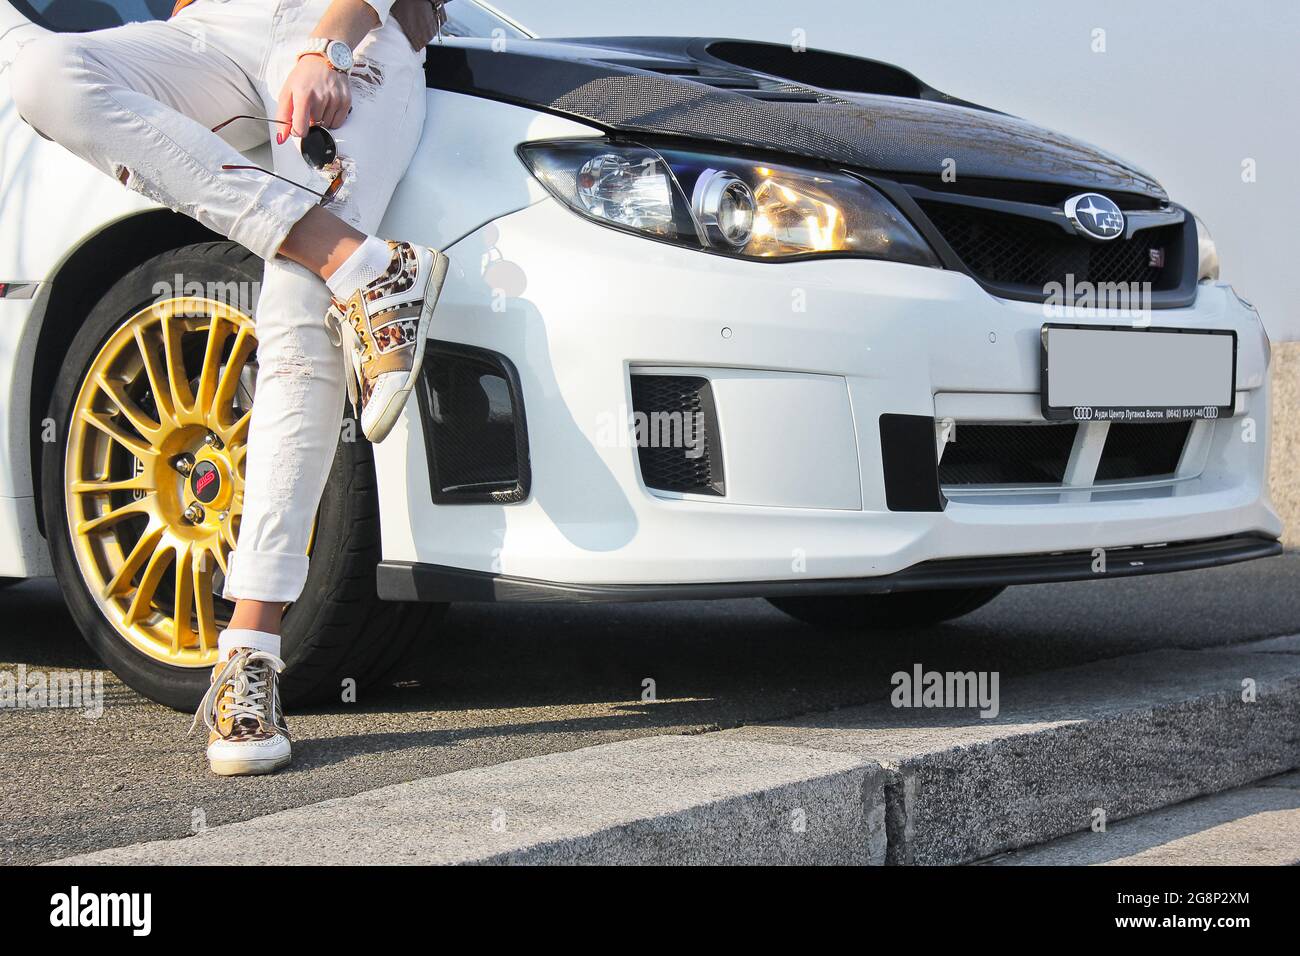 Kiev, Ukraine - March 25, 2015: Subaru Impreza WRX STI. Girl in colored sneakers and in white trousers. Girl on car background. Car and girl Stock Photo